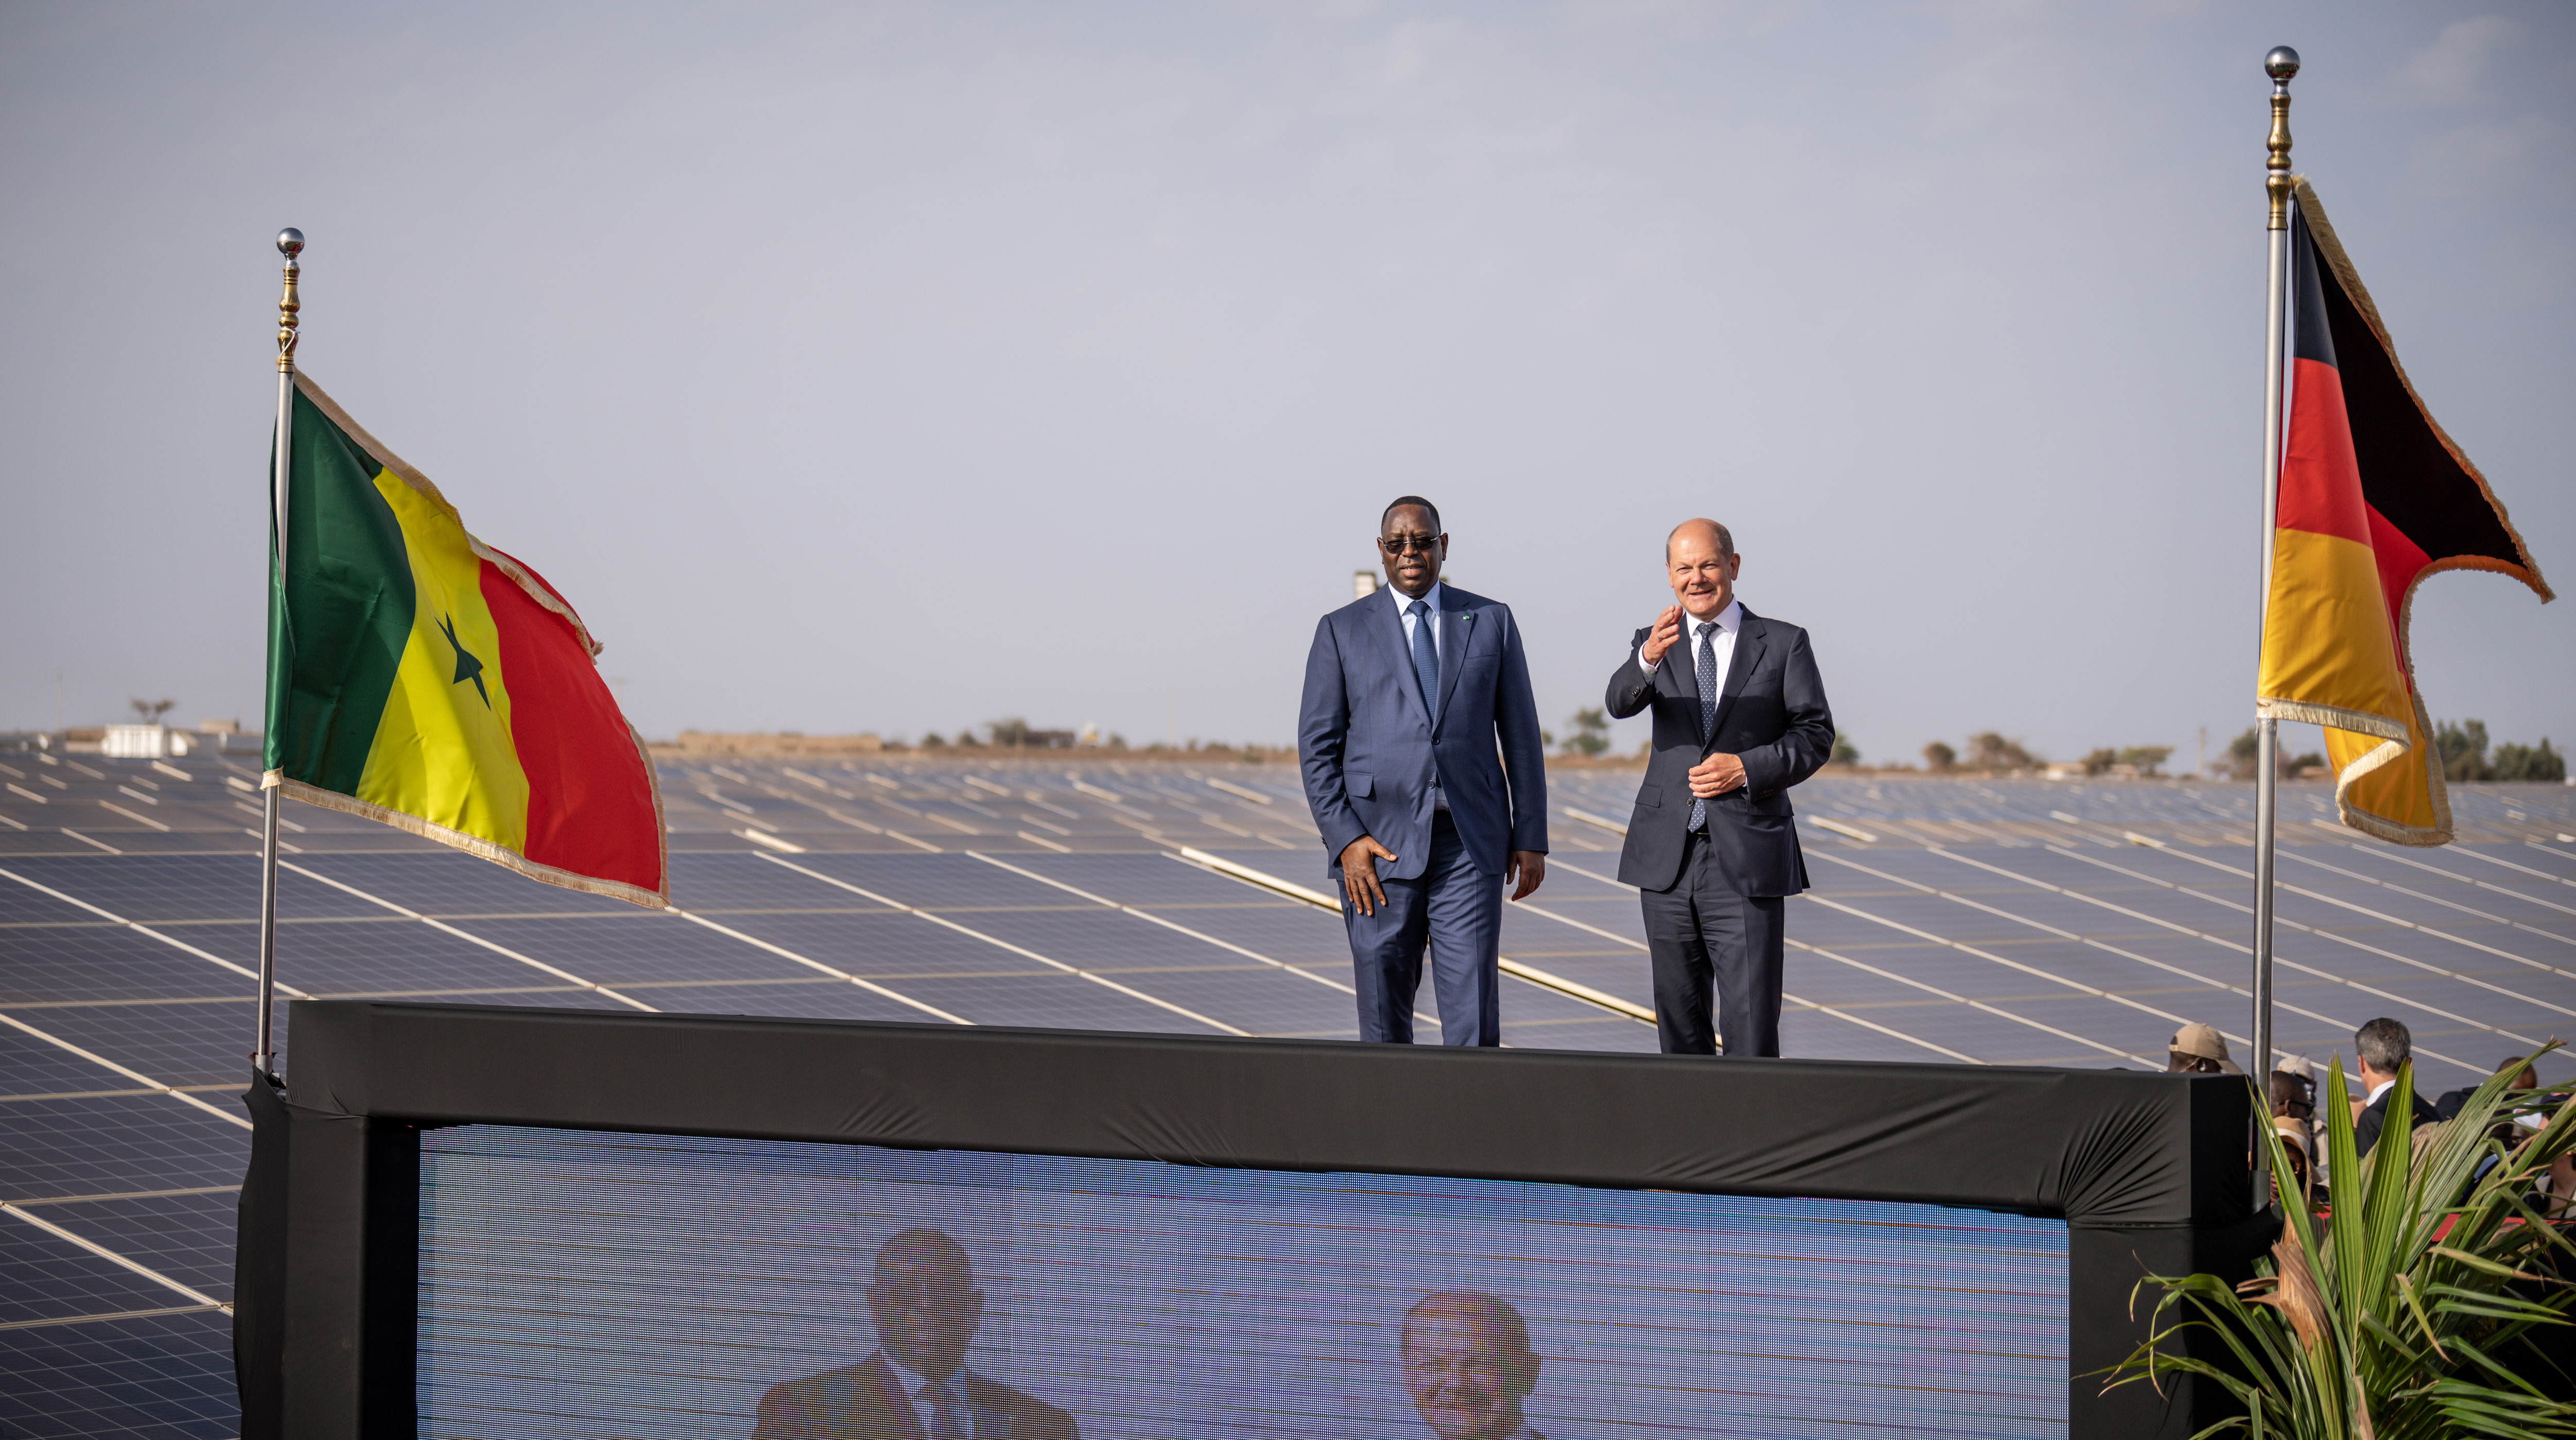 President Macky Sall (l.) and German Chancellor Olaf Scholz (r.) open a photovoltaic plant during the Chancellor